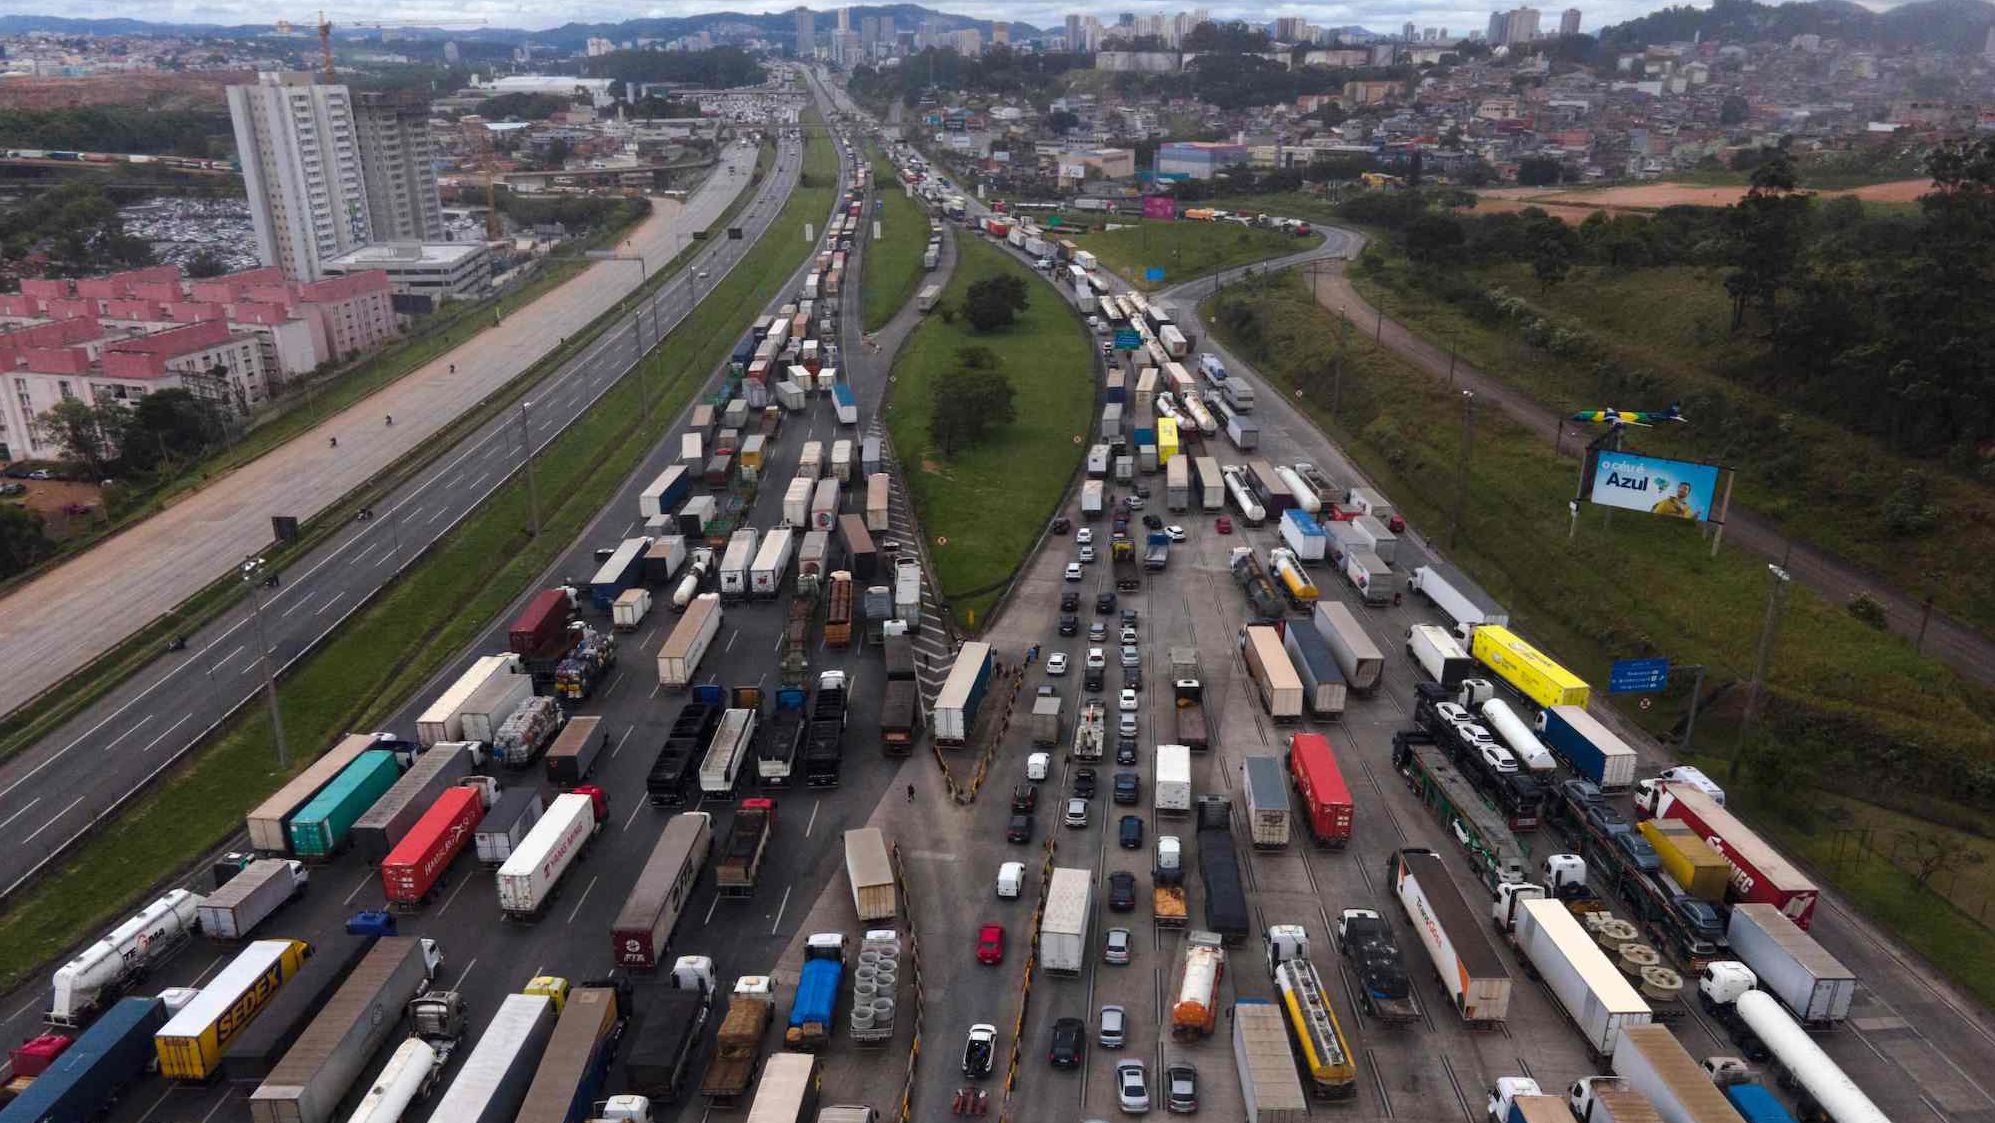 Aerial view showing supporters of President Jair Bolsonaro, mainly truck drivers, blocking Castelo Branco Highway, on the outskirts of Sao Paulo, Brazil.